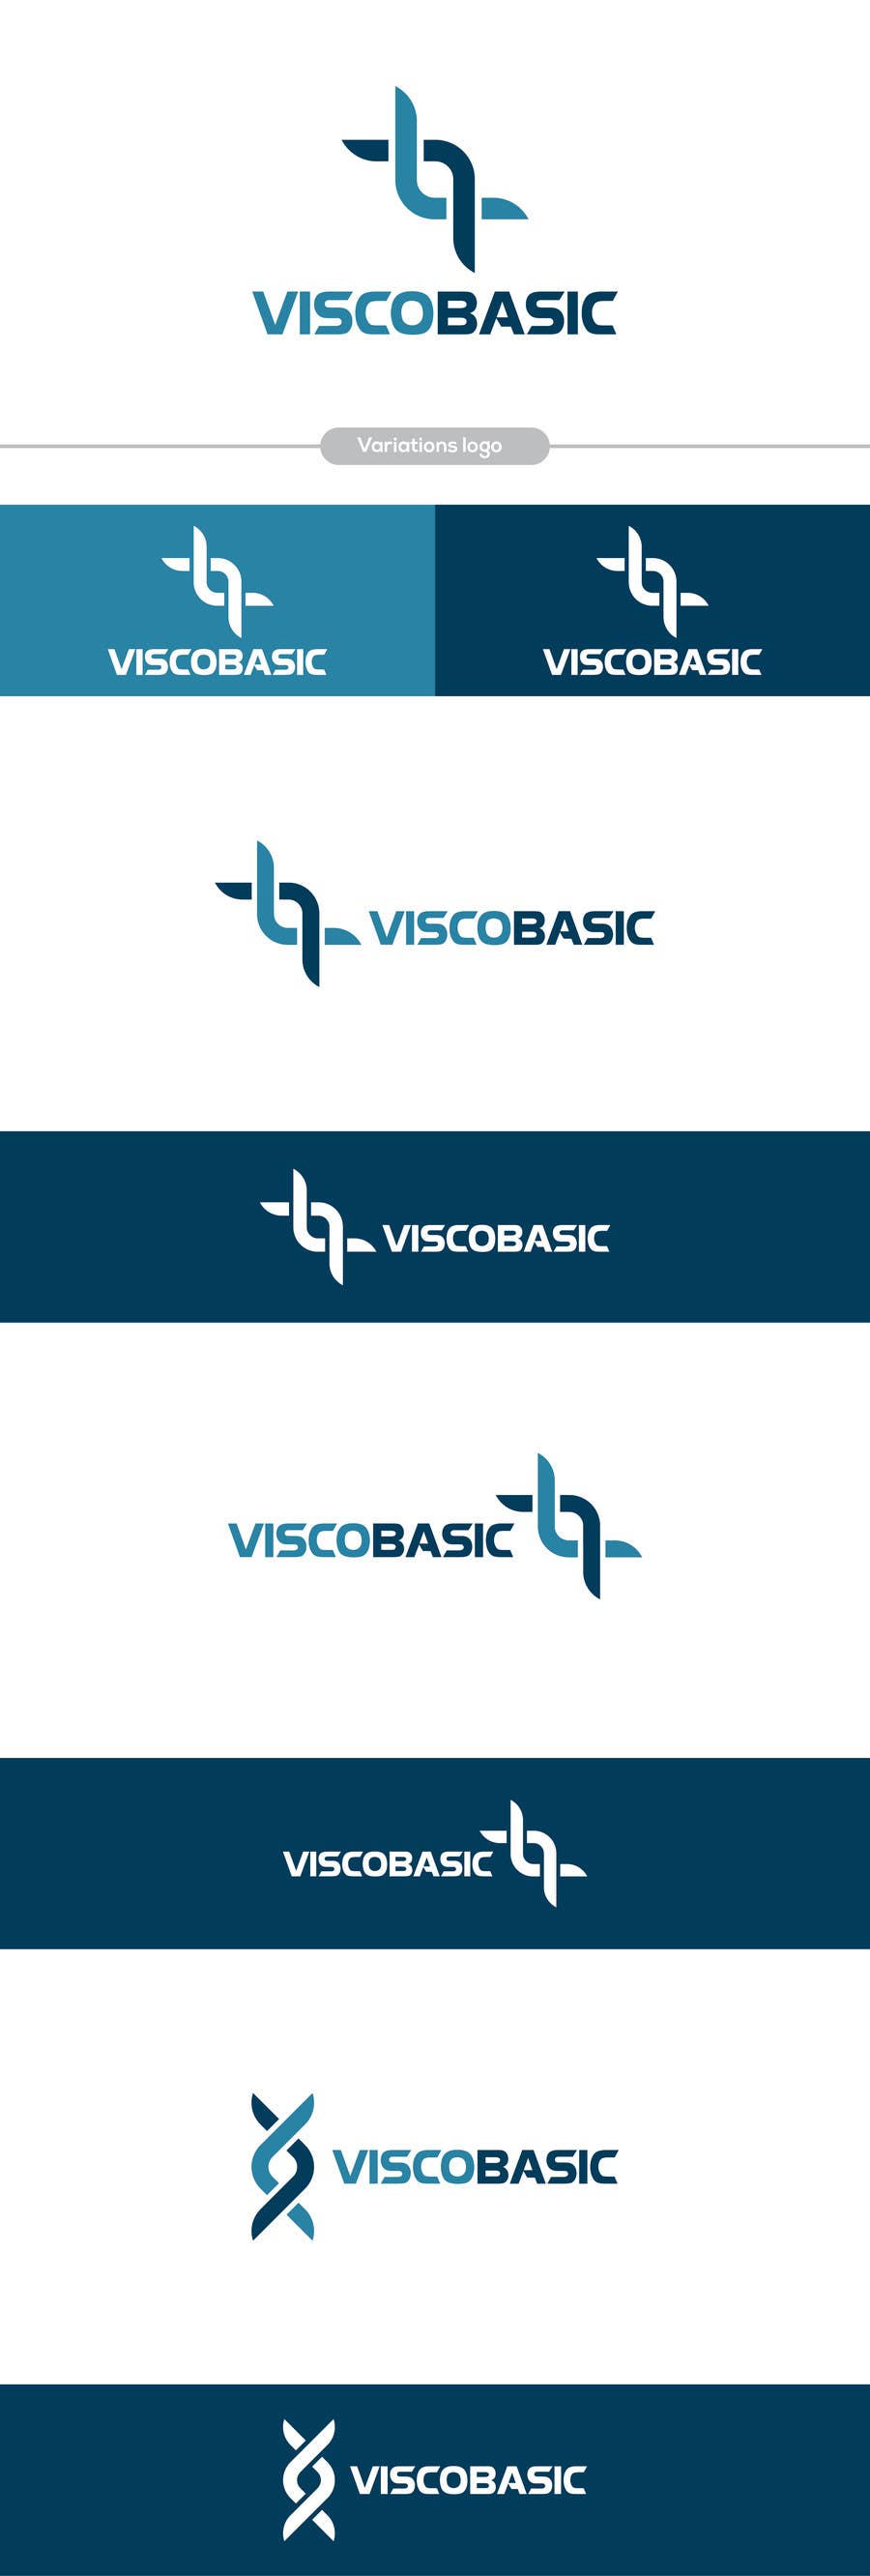 Proposition n°265 du concours                                                 Logo Design - Refresh for a pharmaceutical distributor
                                            